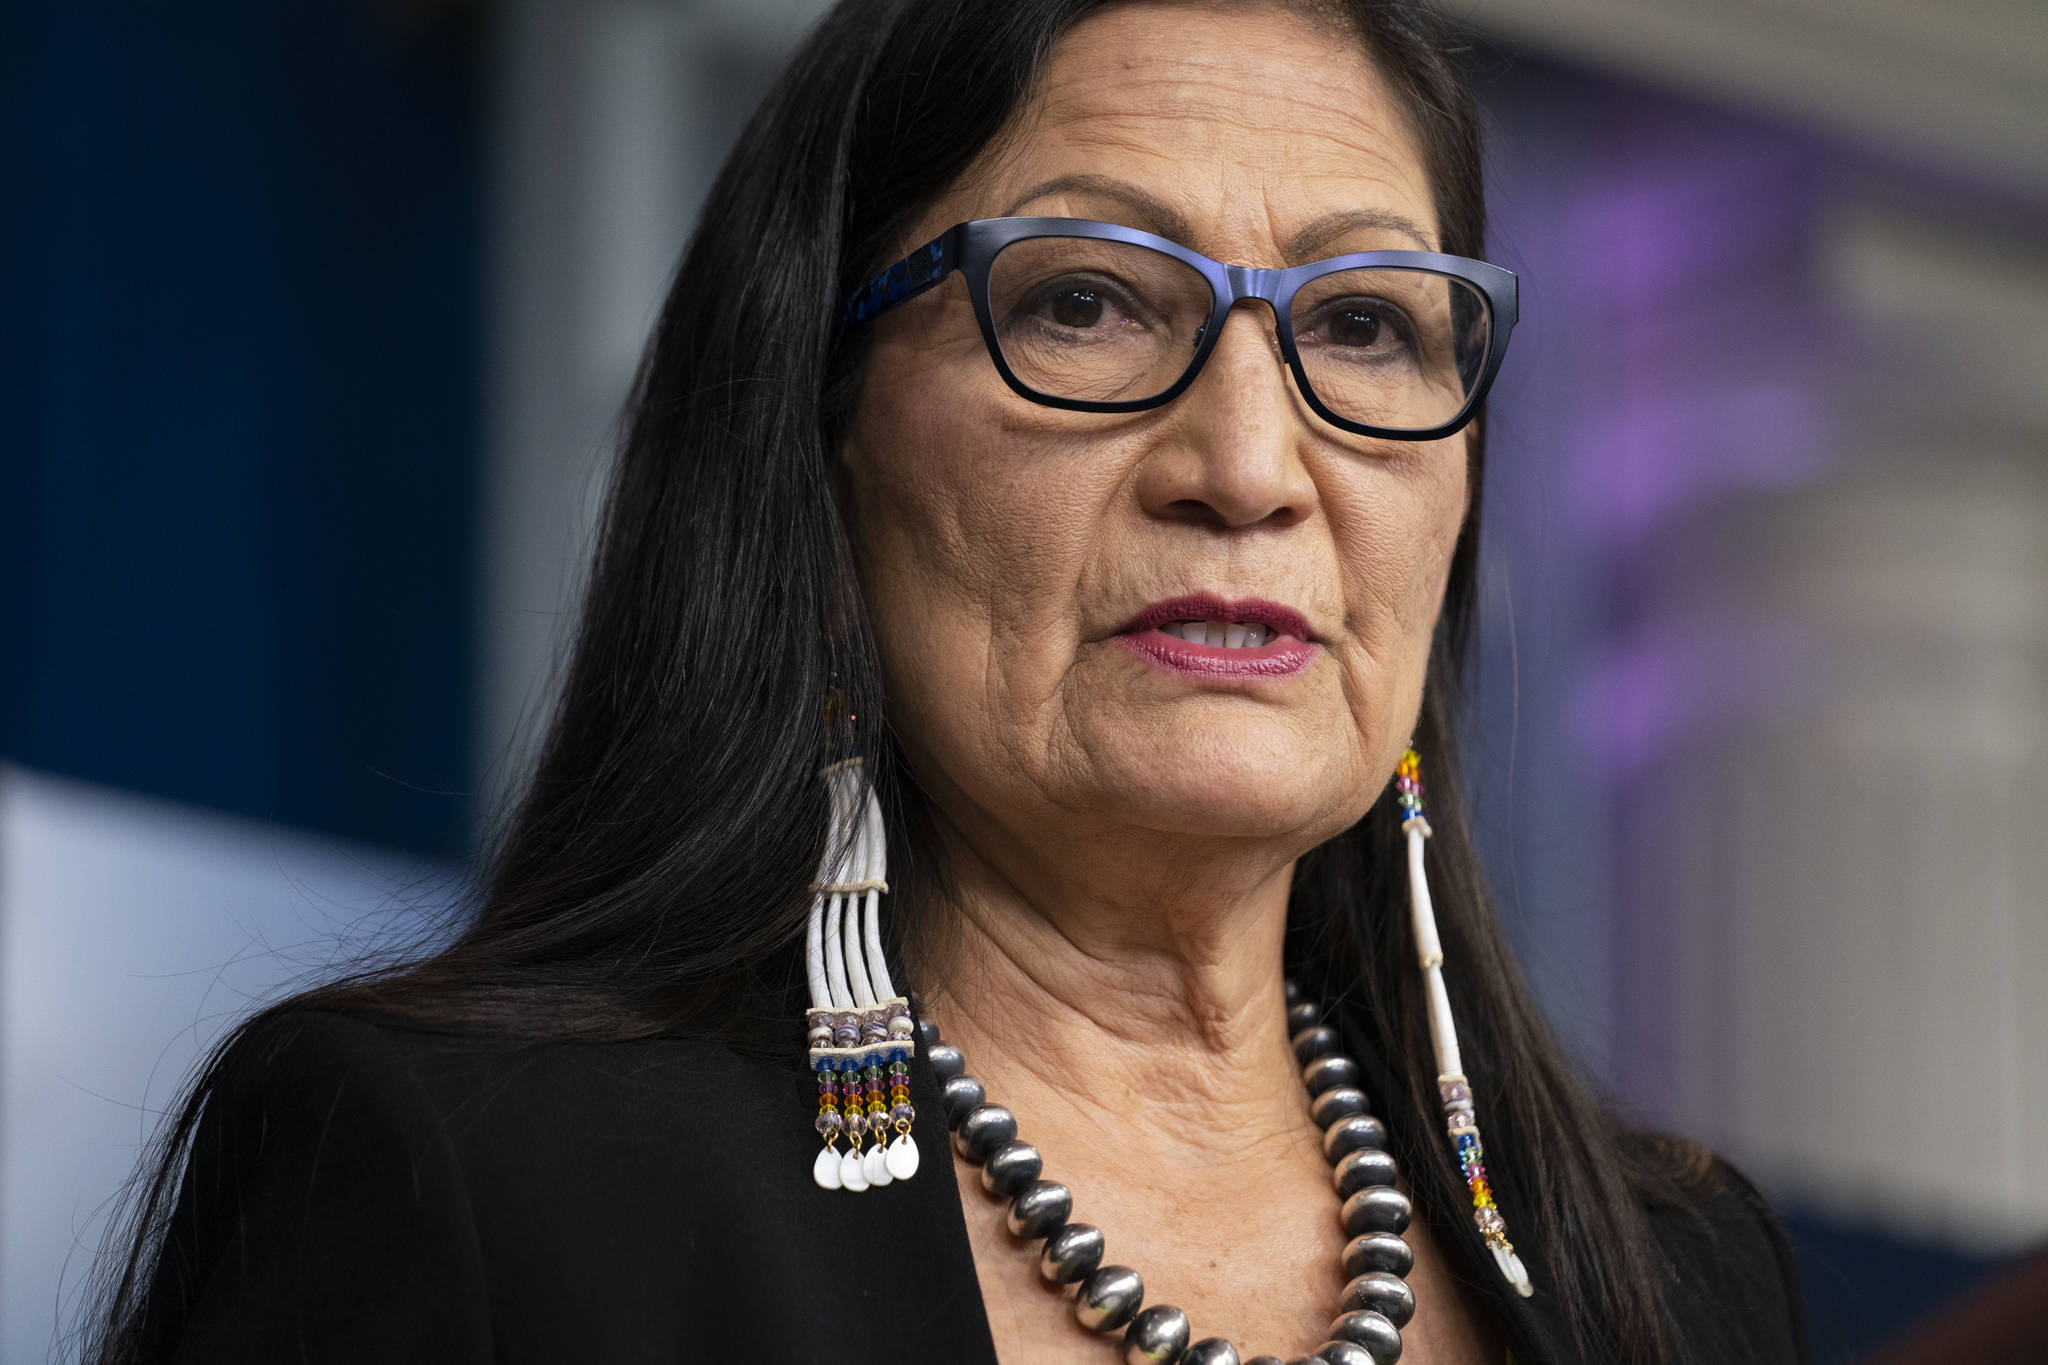 FILE - In this April 23, 2021, file photo, Interior Secretary Deb Haaland speaks during a news briefing at the White House in Washington. On Tuesday, June 22, 2021, Haaland and other federal officials are expected to announce steps that the federal government plans to take to reconcile the legacy of boarding school policies on Indigenous families and communities across the U.S. (AP Photo / Evan Vucci)